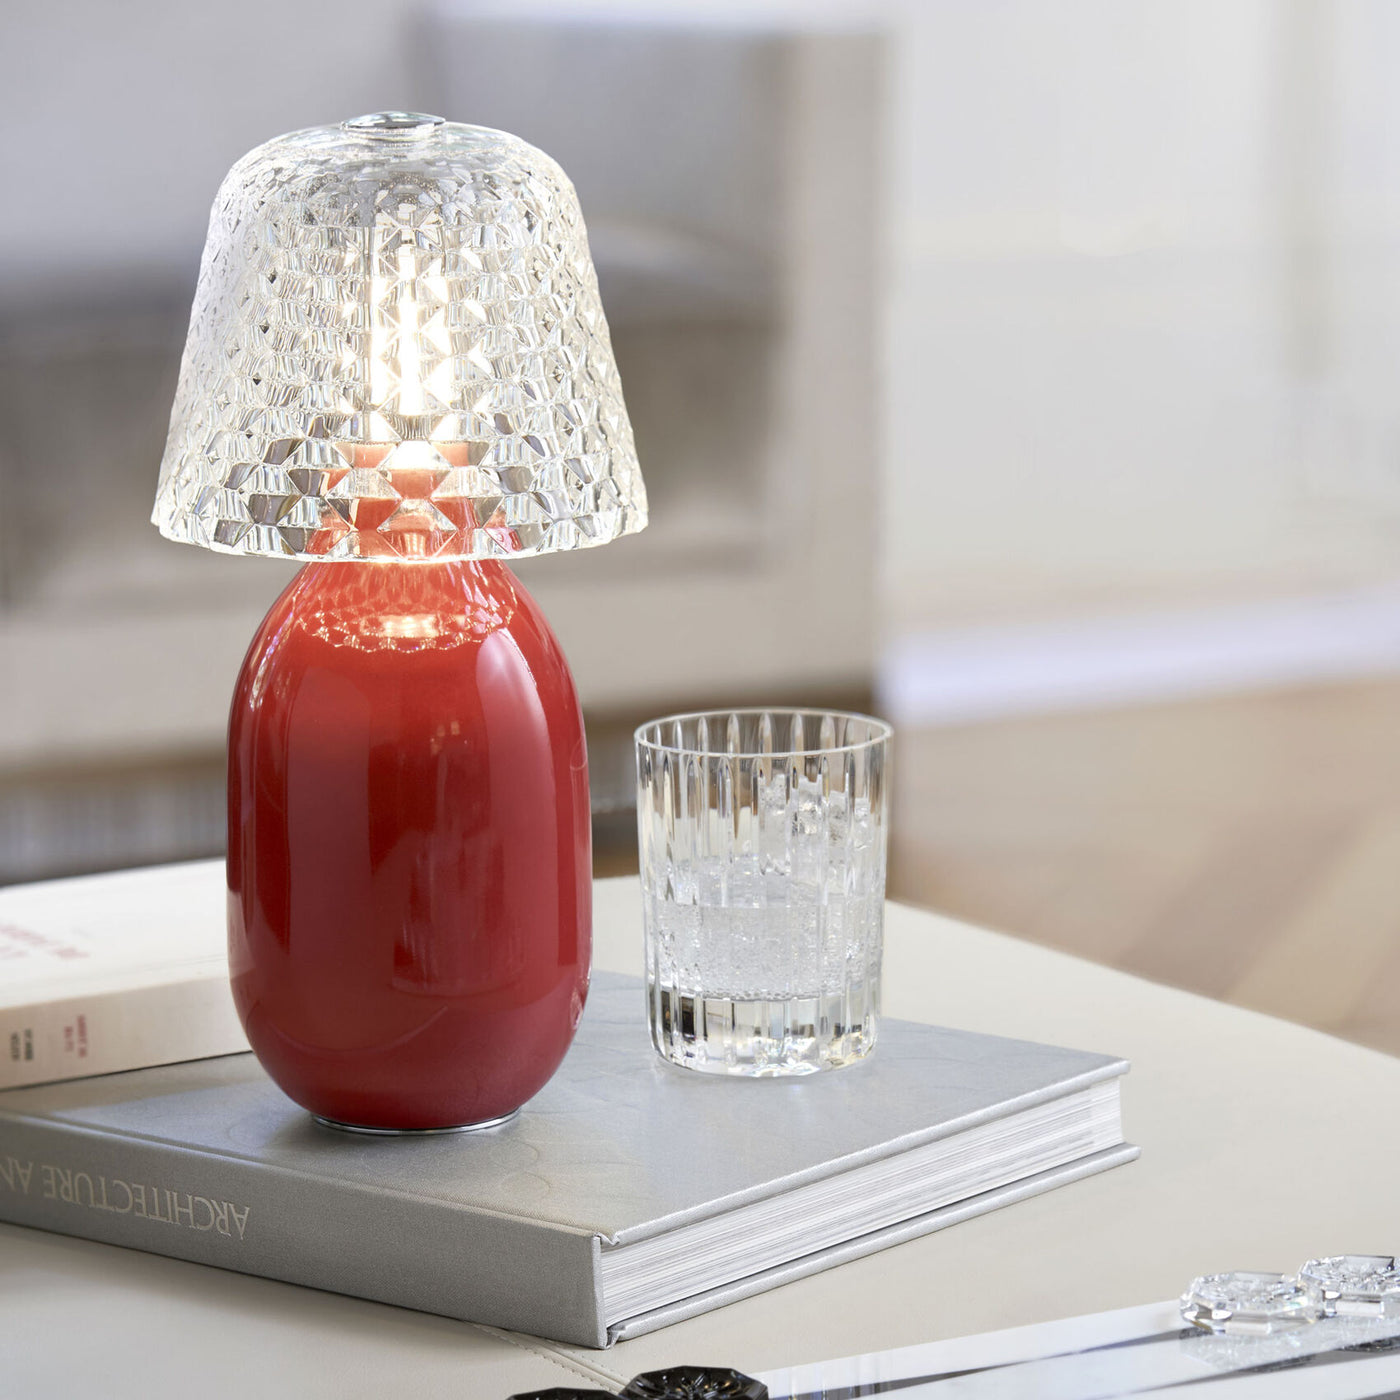 Baccarat Baby Candy Light, Red